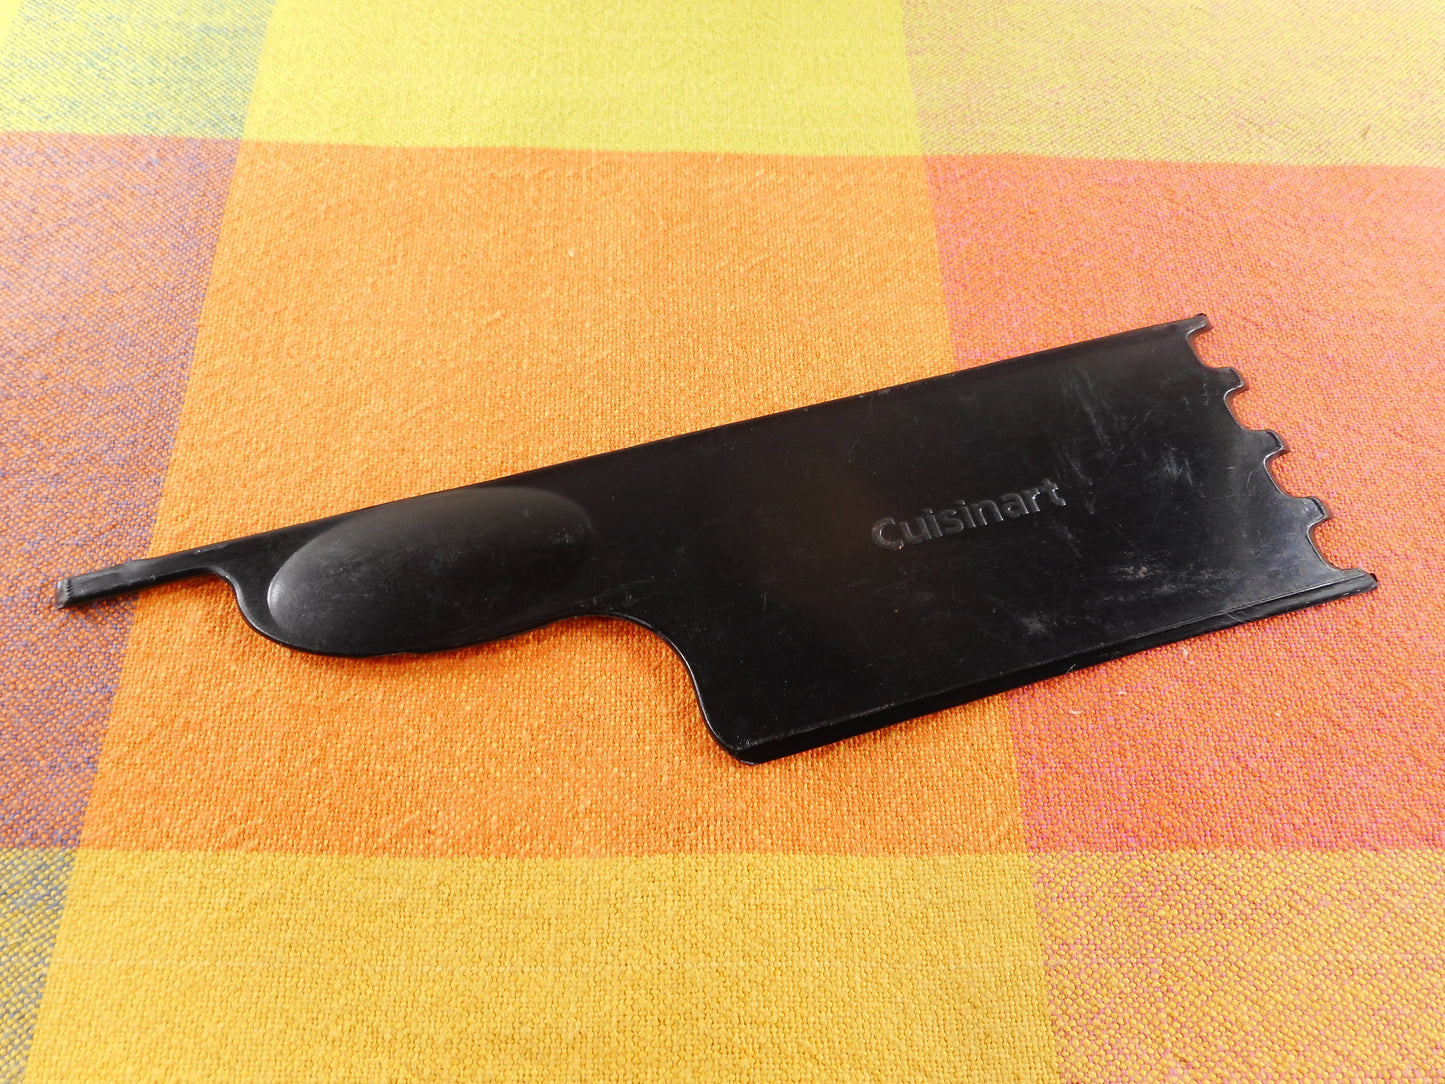 Cuisinart GR-4NSC Scrapper Grill Cleaner Tool Used